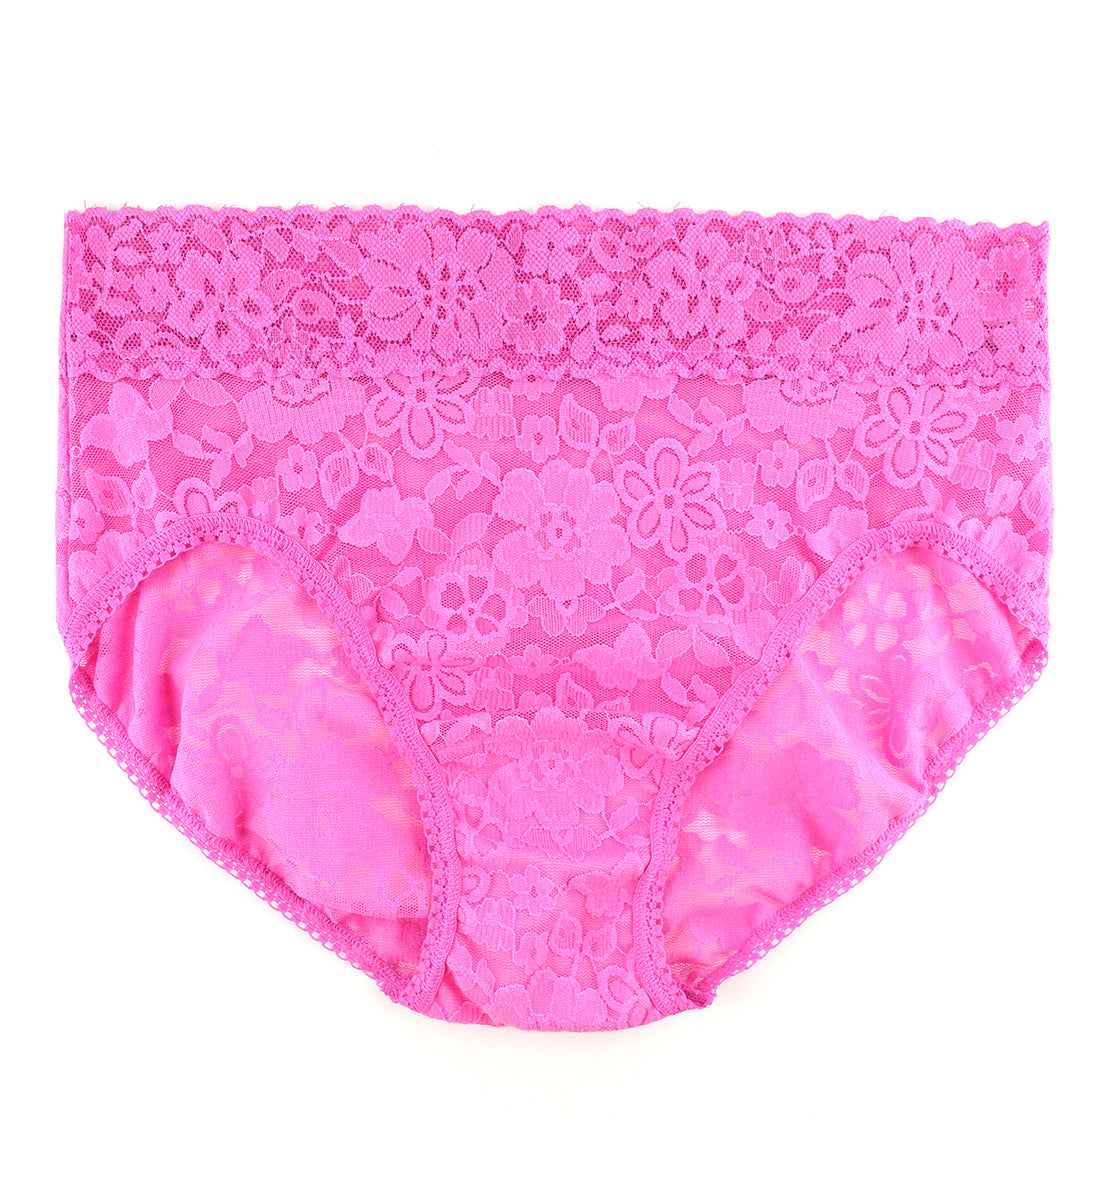 Hanky Panky Daily Lace French Brief PLUS (772461X),1X,Dream House Pink - Dream House Pink,1X